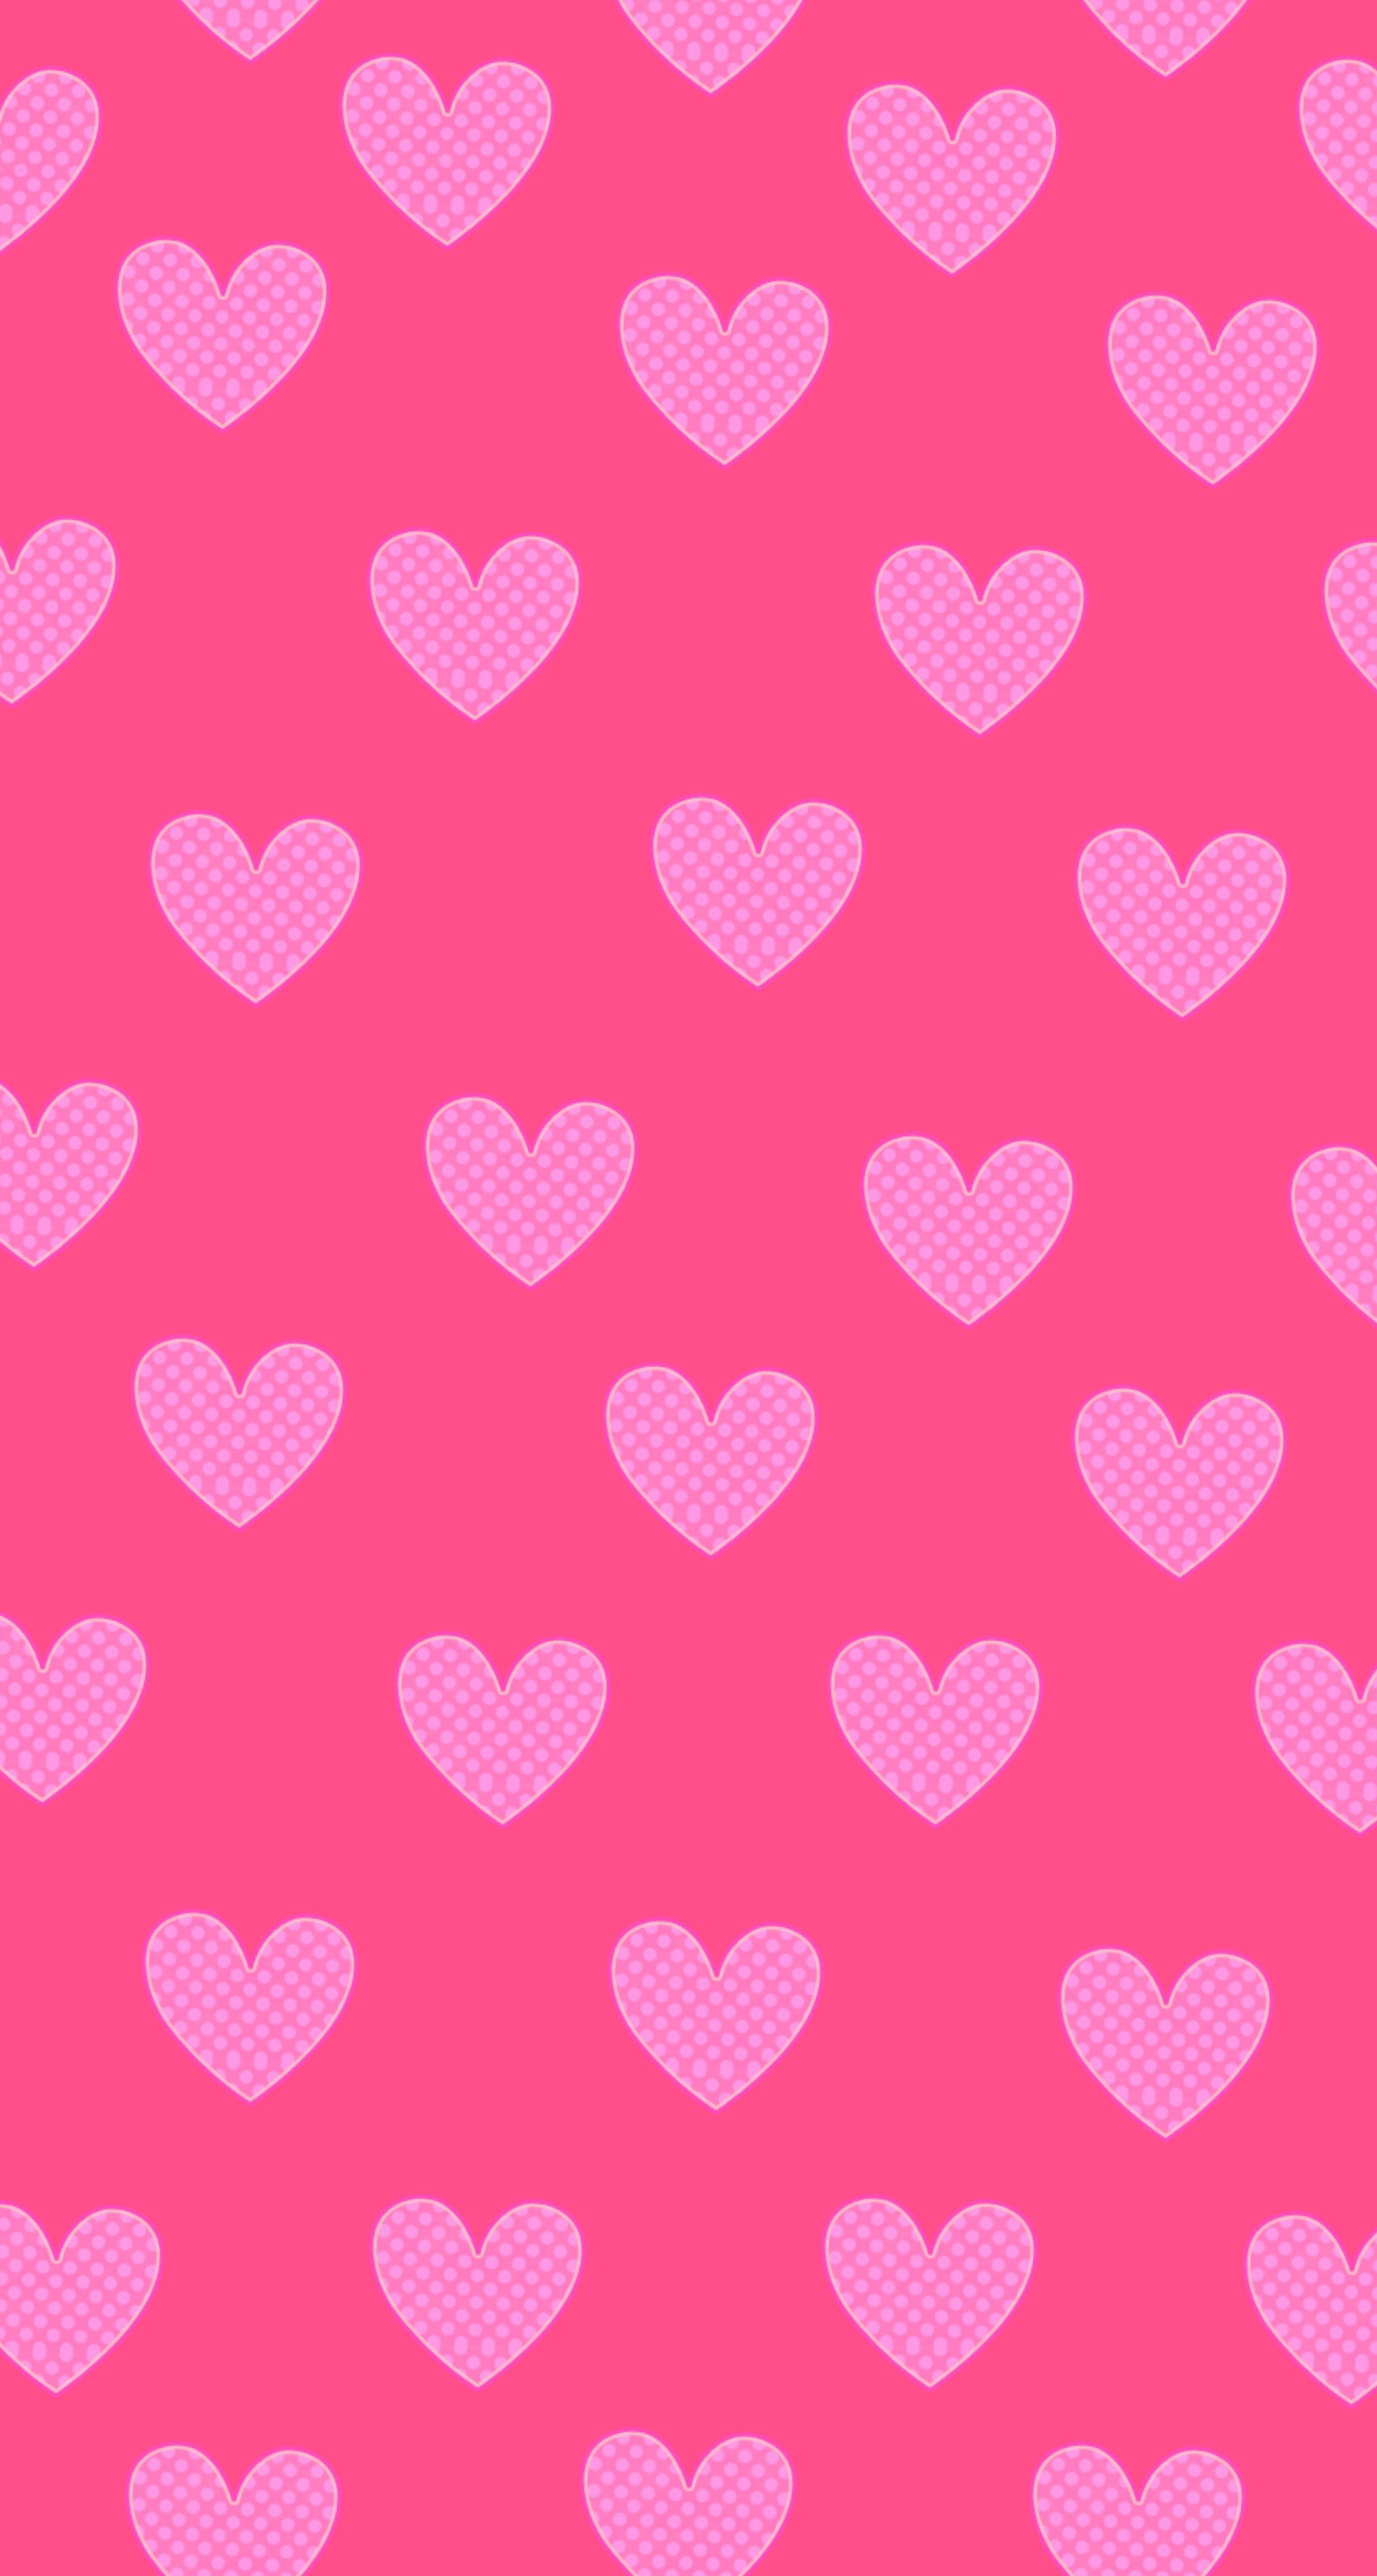 1745x3264 It's all about Hearts â¡